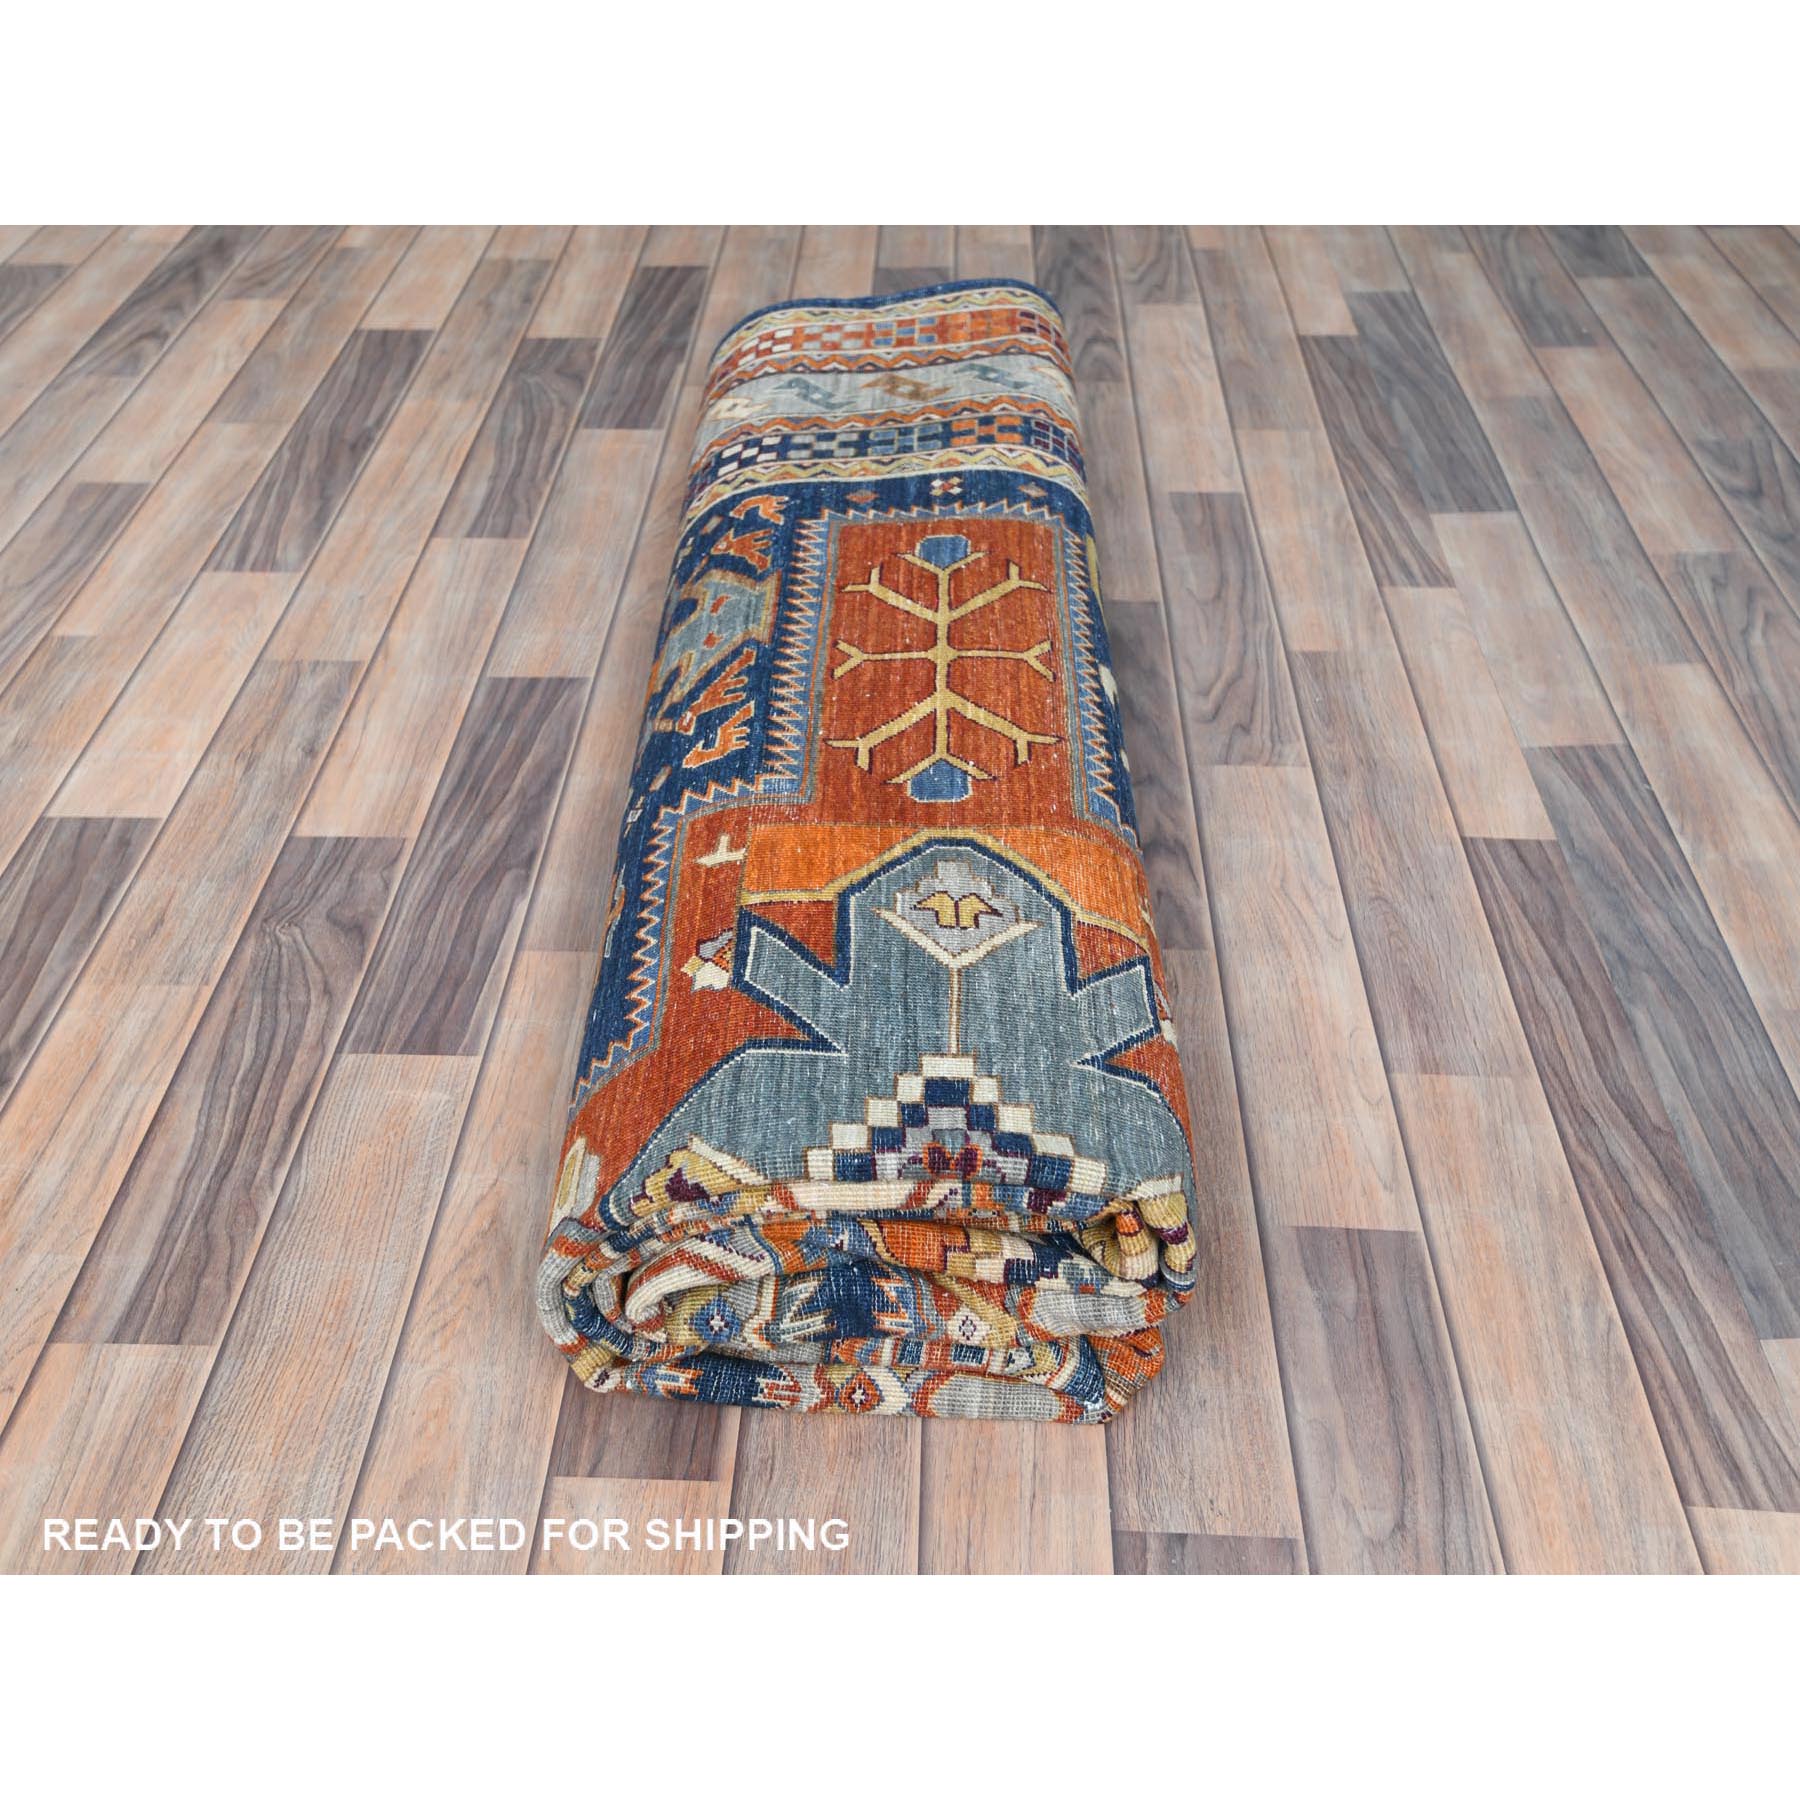 8'4"x9'7" Navy Blue, Natural Dyes Densely Woven, Natural Wool Hand Woven, Armenian Inspired Caucasian Design with Bird Figurines 200 KPSI, Oriental Rug 